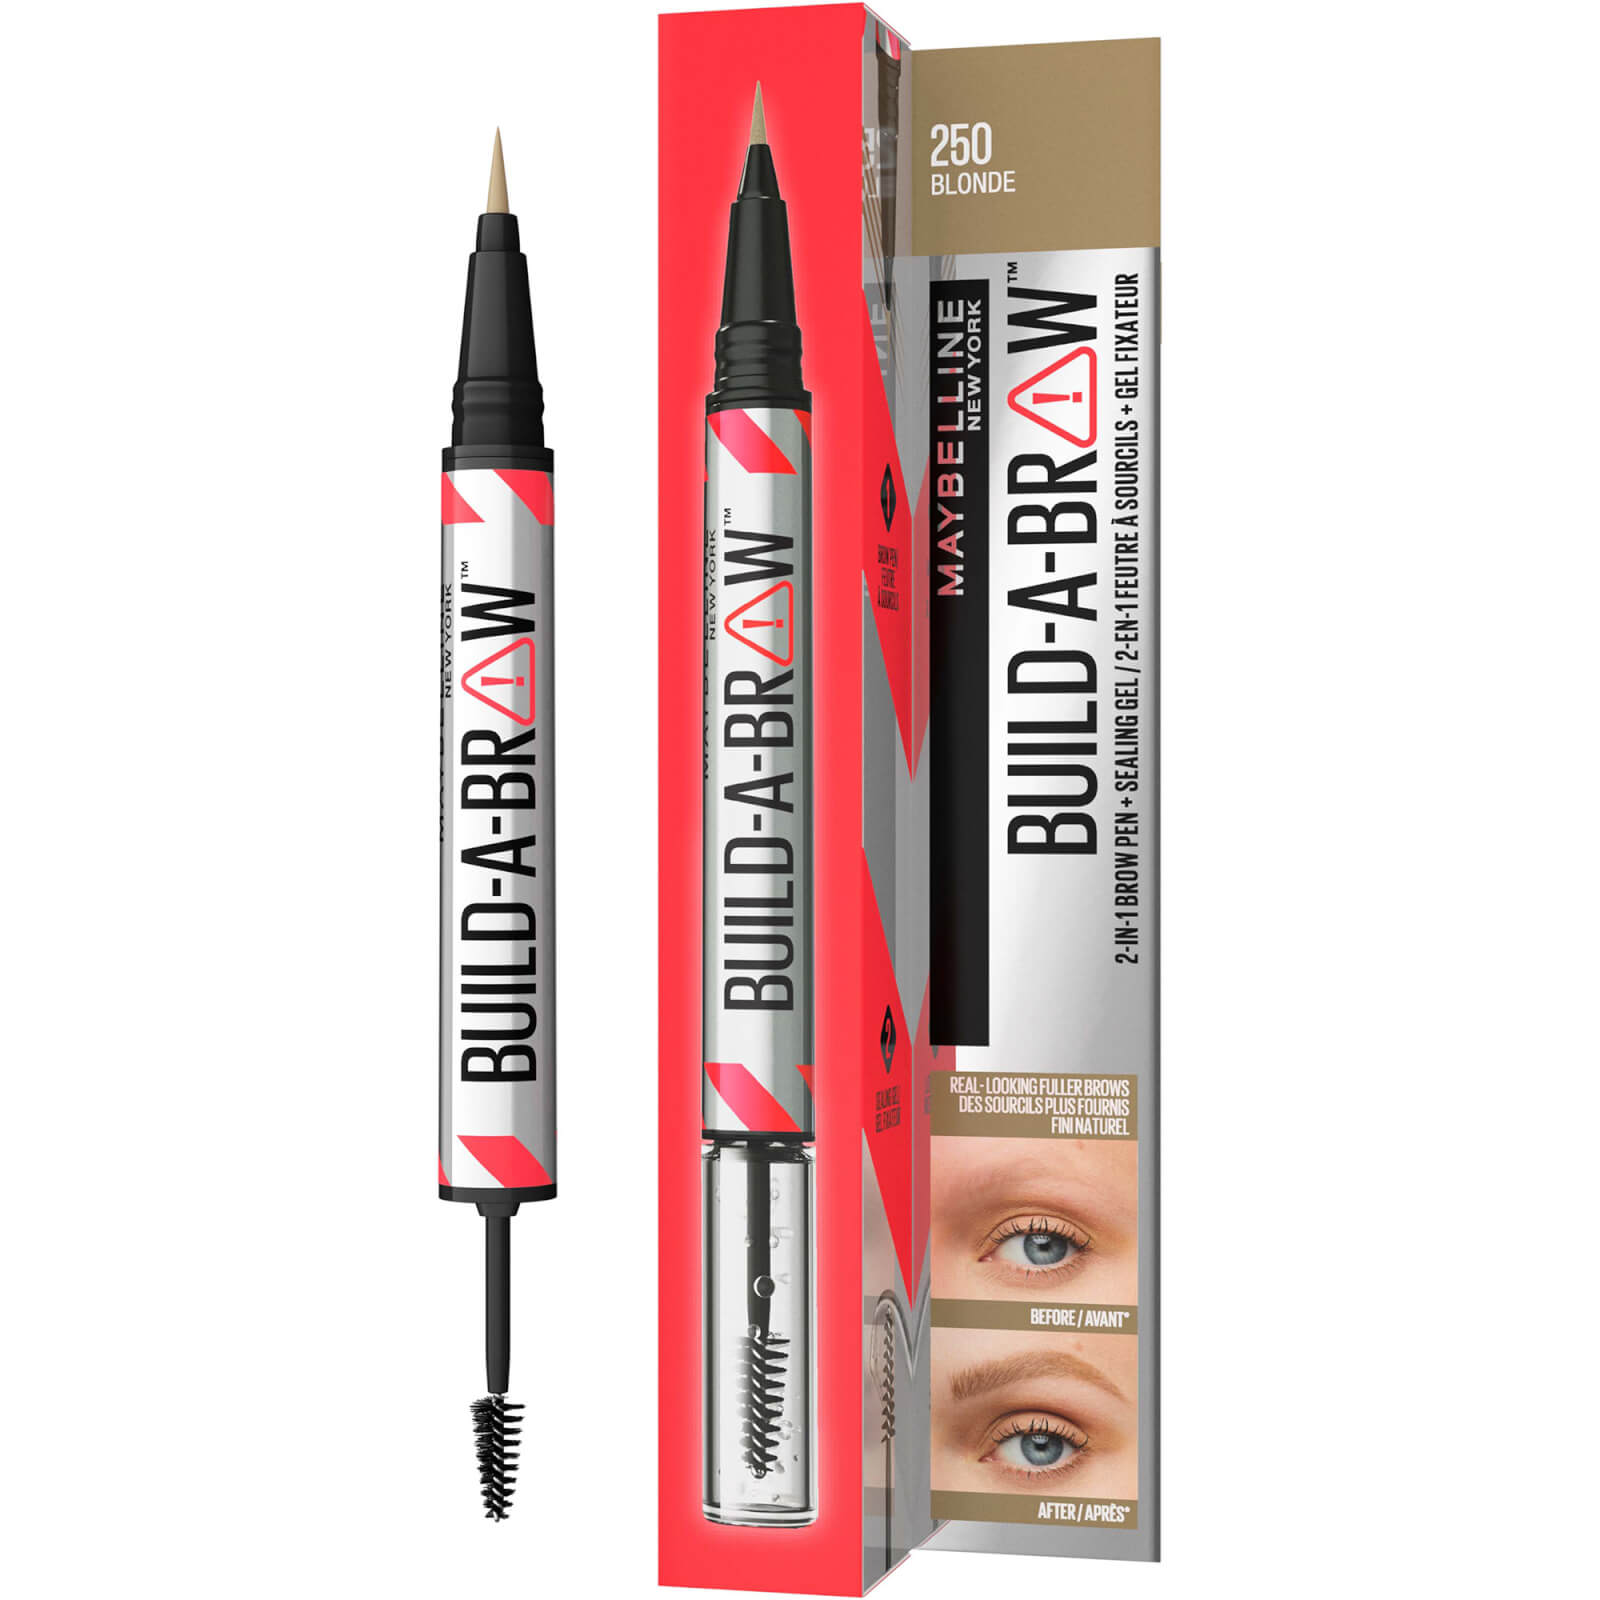 Maybelline Build-A-Brow 2 Easy Steps Eye Brow Pencil and Gel (Various Shades) - Blonde